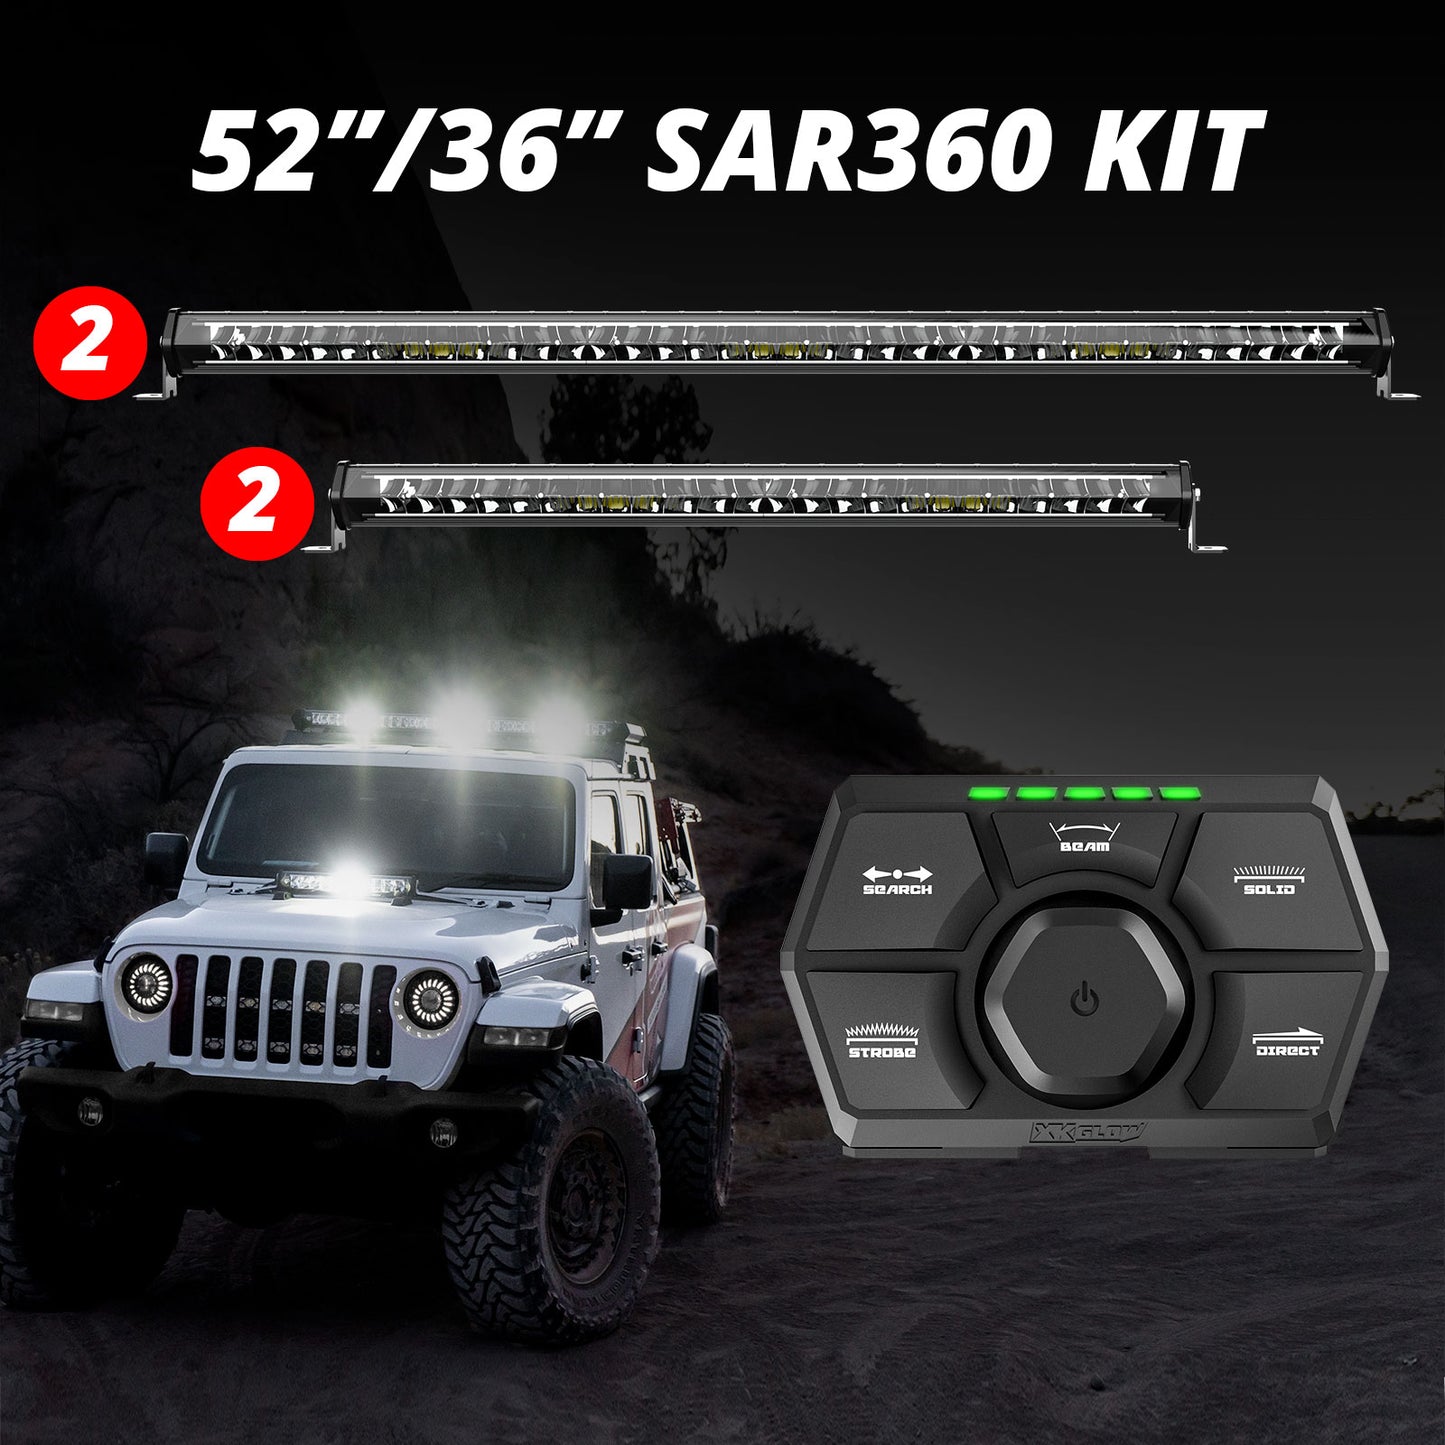 XKGLOW XK-SAR360-3322 (2)52 (2)36” SAR360 Light Bar Kit Emergency Search and Rescue Light System